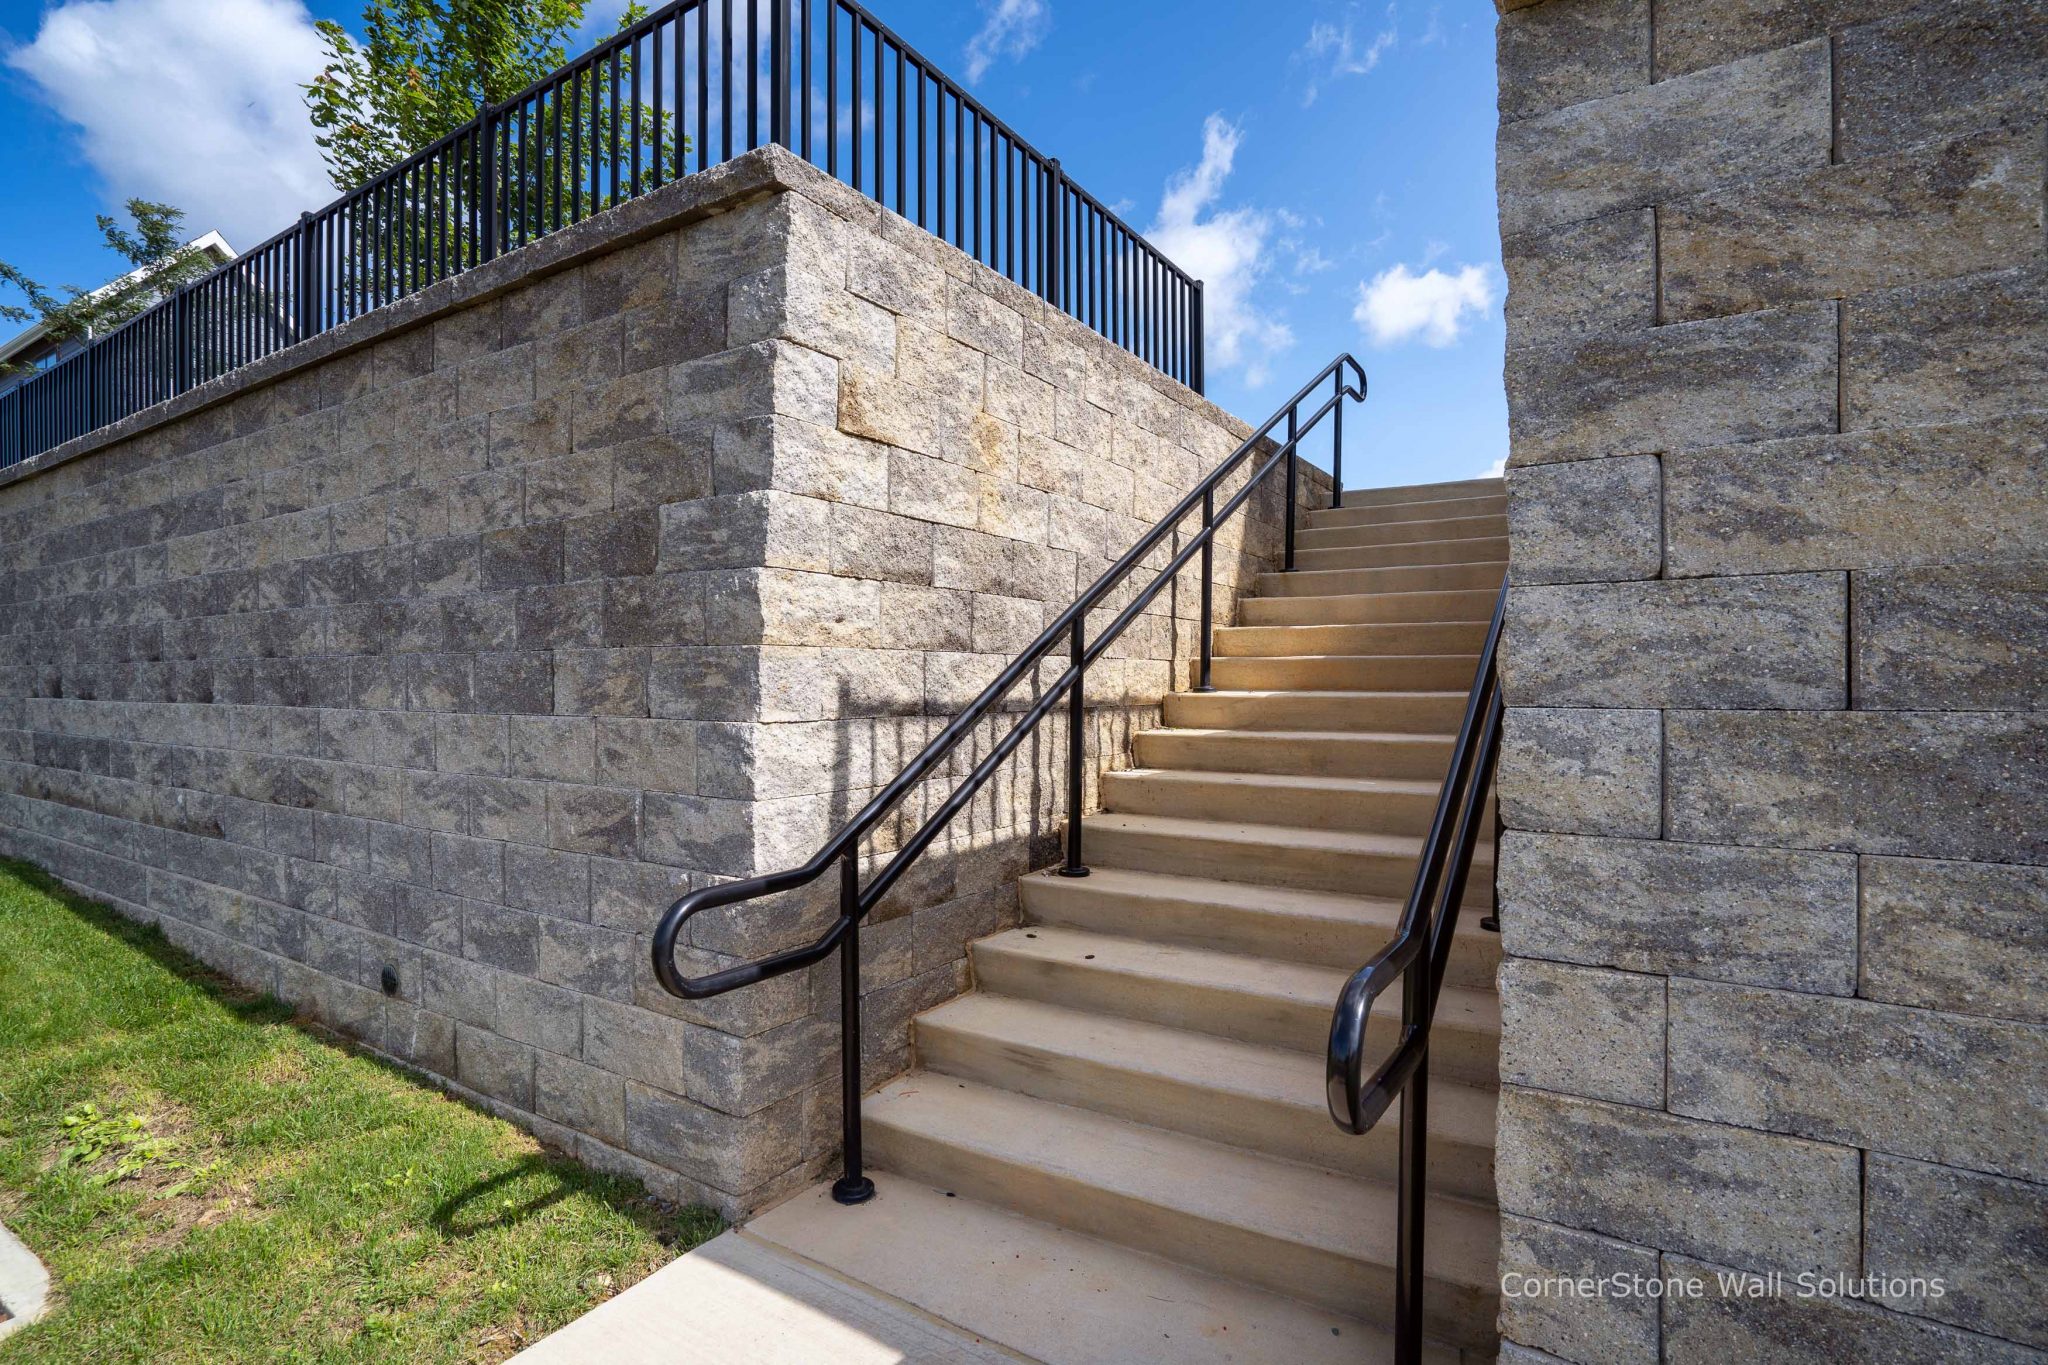 Built-In Stairs to CornerStone Retaining Wall Penn State